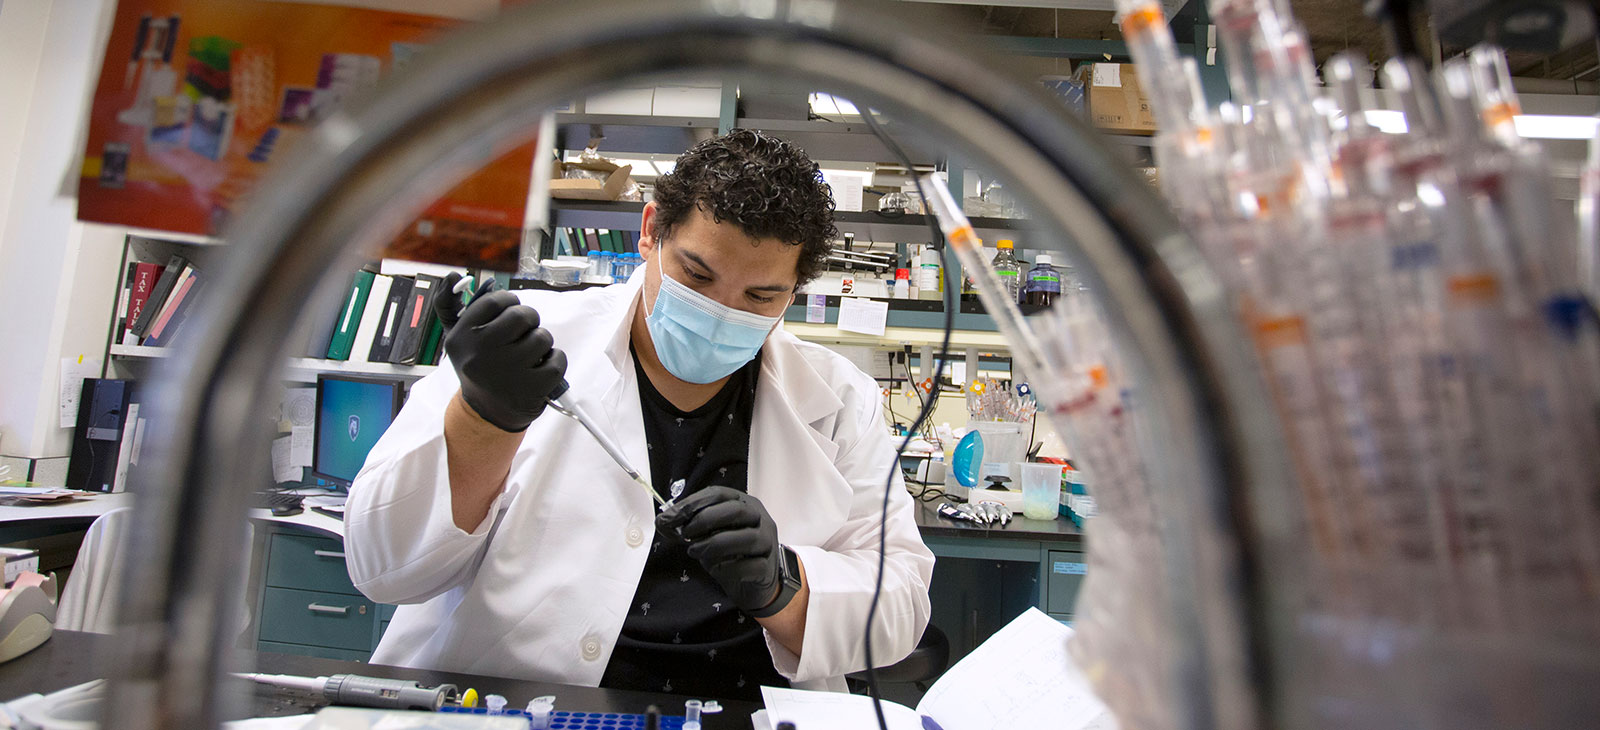 Joe Cirilo, a student in the Biomedical Sciences PhD program, is seen at work in a College of Medicine lab in June 2020.